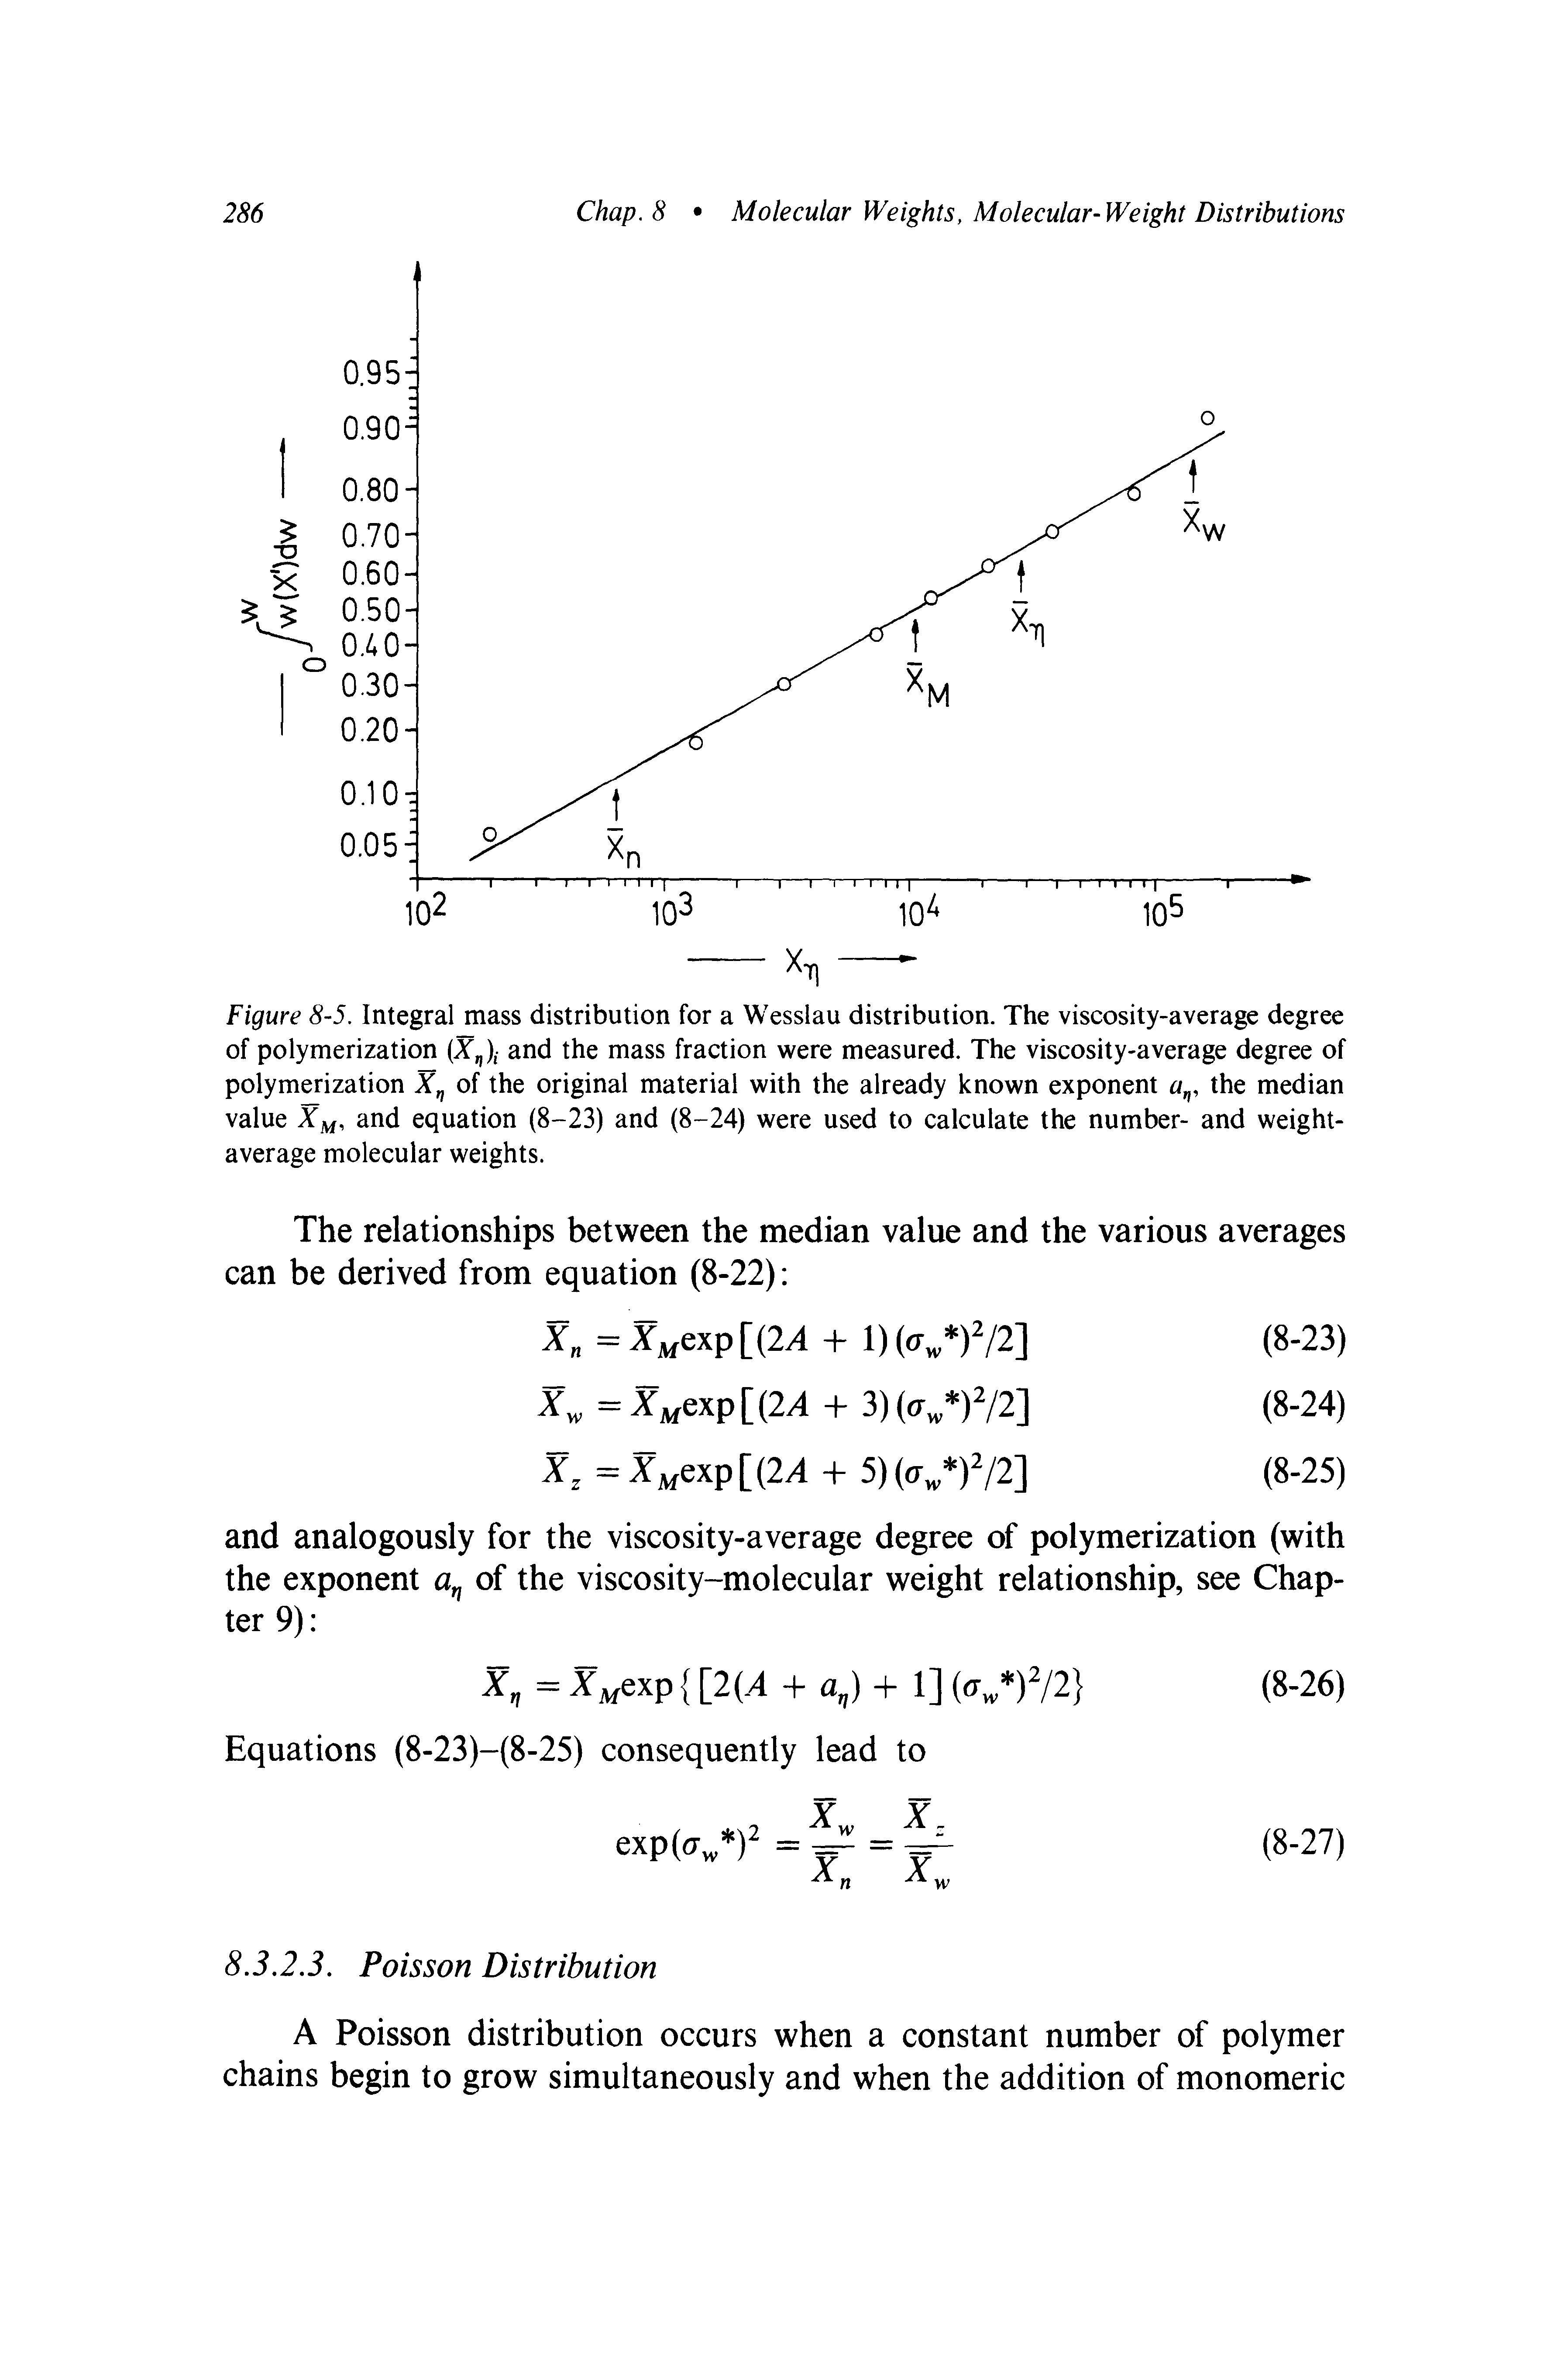 Figure 8-5. Integral mass distribution for a Wesslau distribution. The viscosity-average degree of polymerization (X,), and the mass fraction were measured. The viscosity-average degree of polymerization of the original material with the already known exponent the median value Xjvf, and equation (8-23) and (8-24) were used to calculate the number- and weight-average molecular weights.